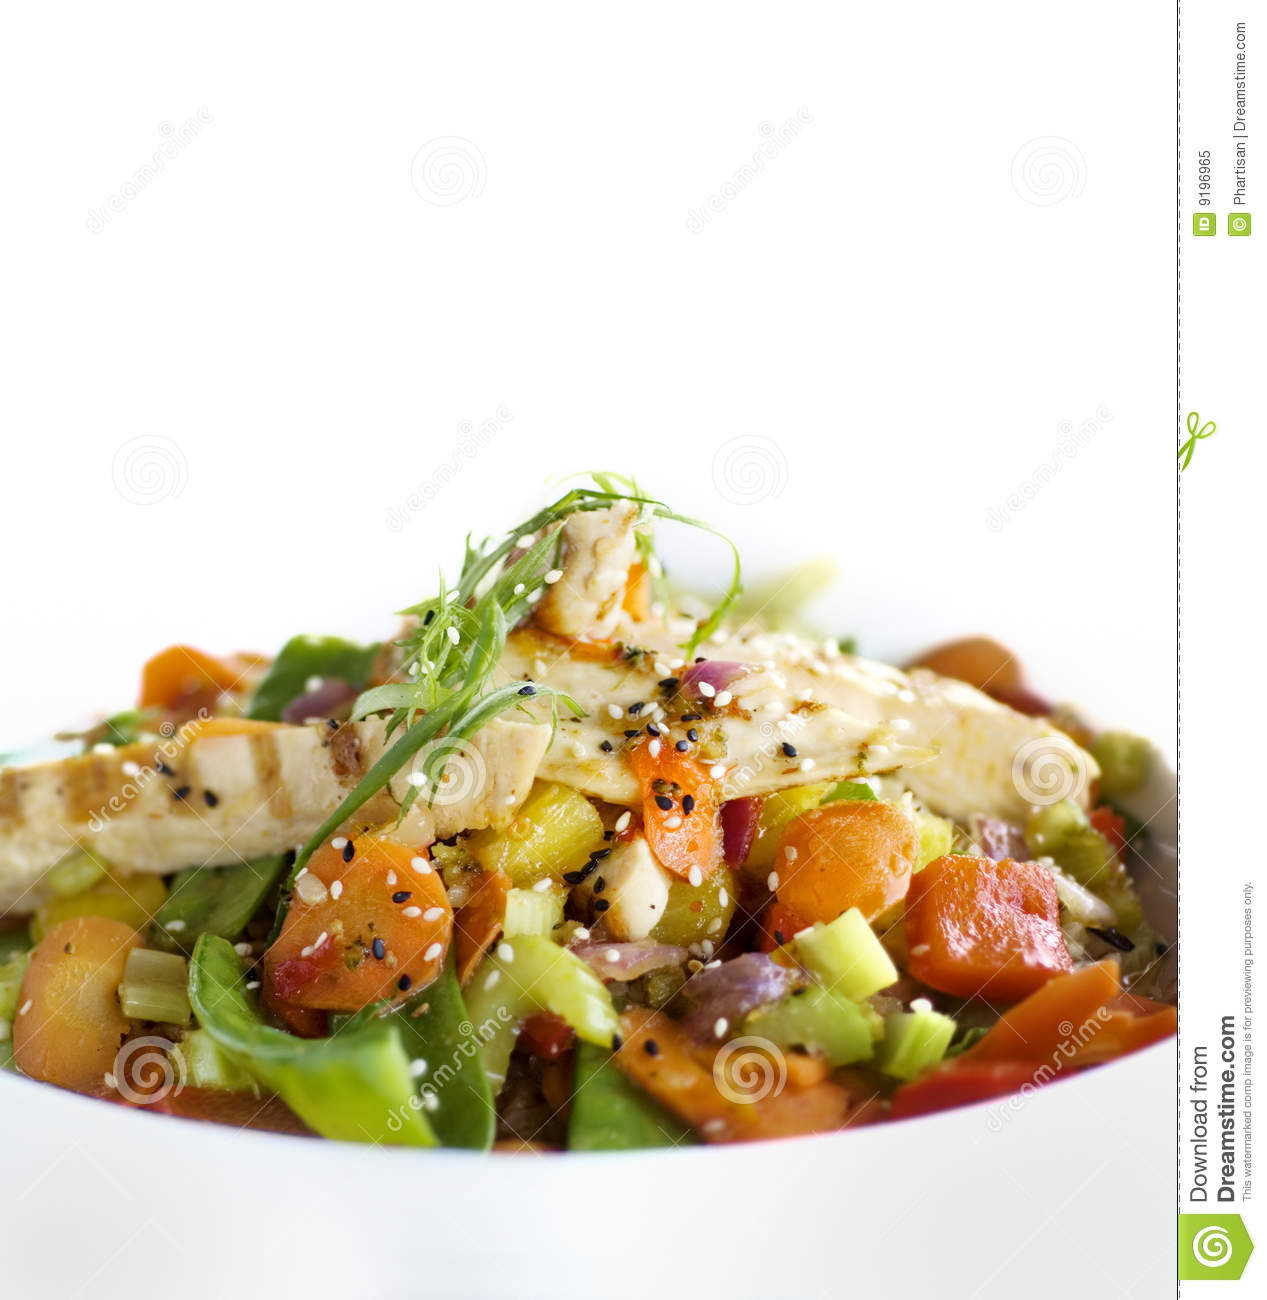 Healthy Asian Snacks
 Healthy Asian food stock image Image of gourmet food